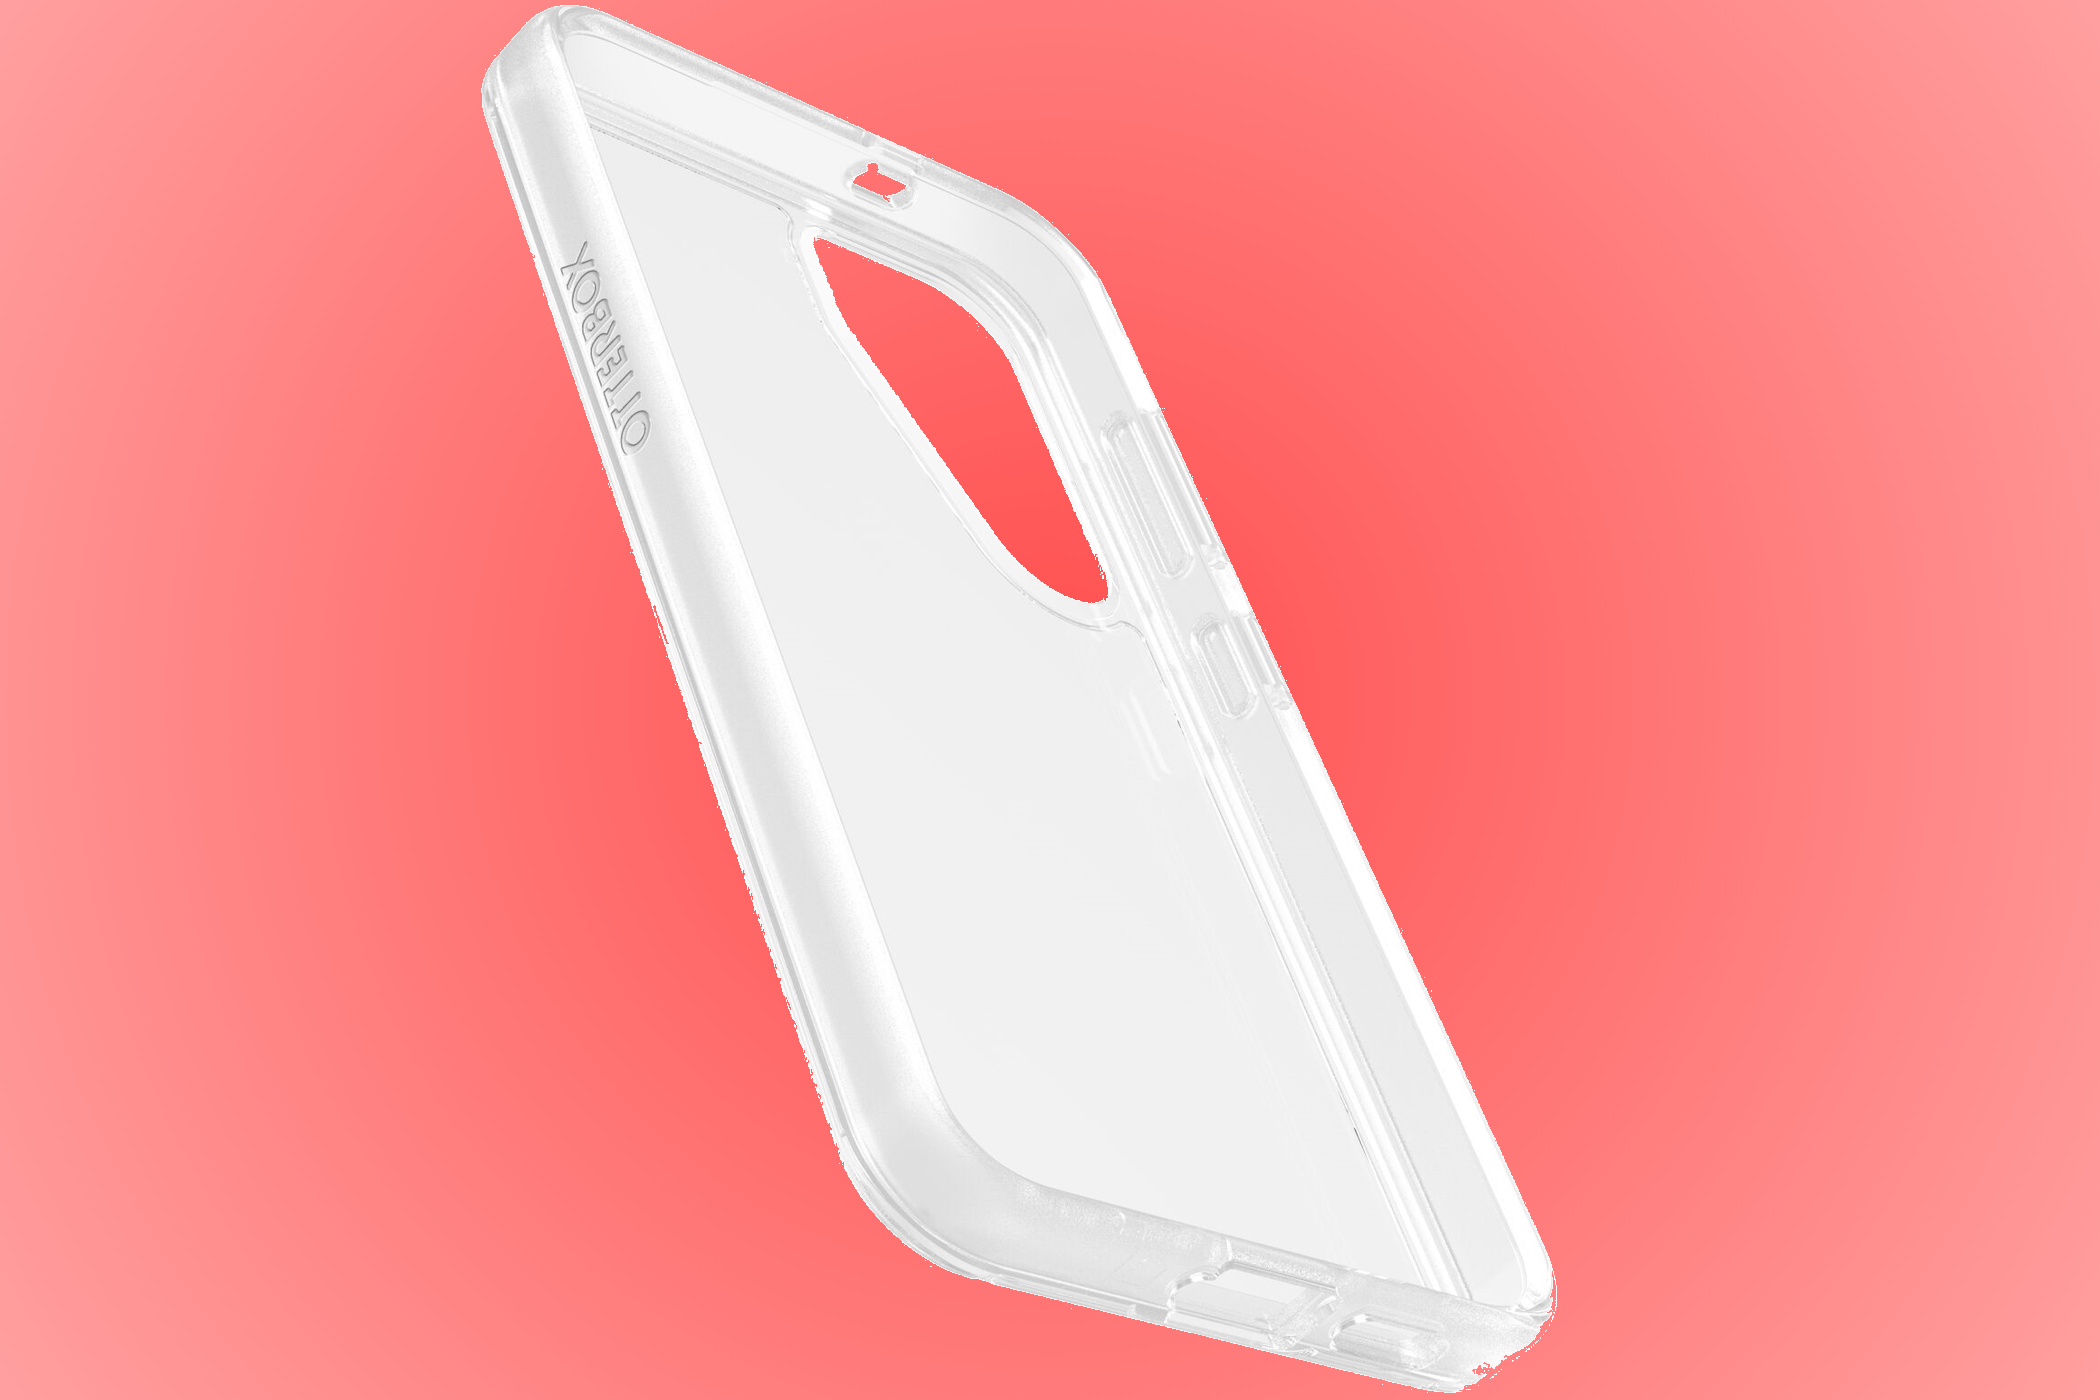 Otterbox - Symmetry Clear Case For Samsung Galaxy S24 Ultra